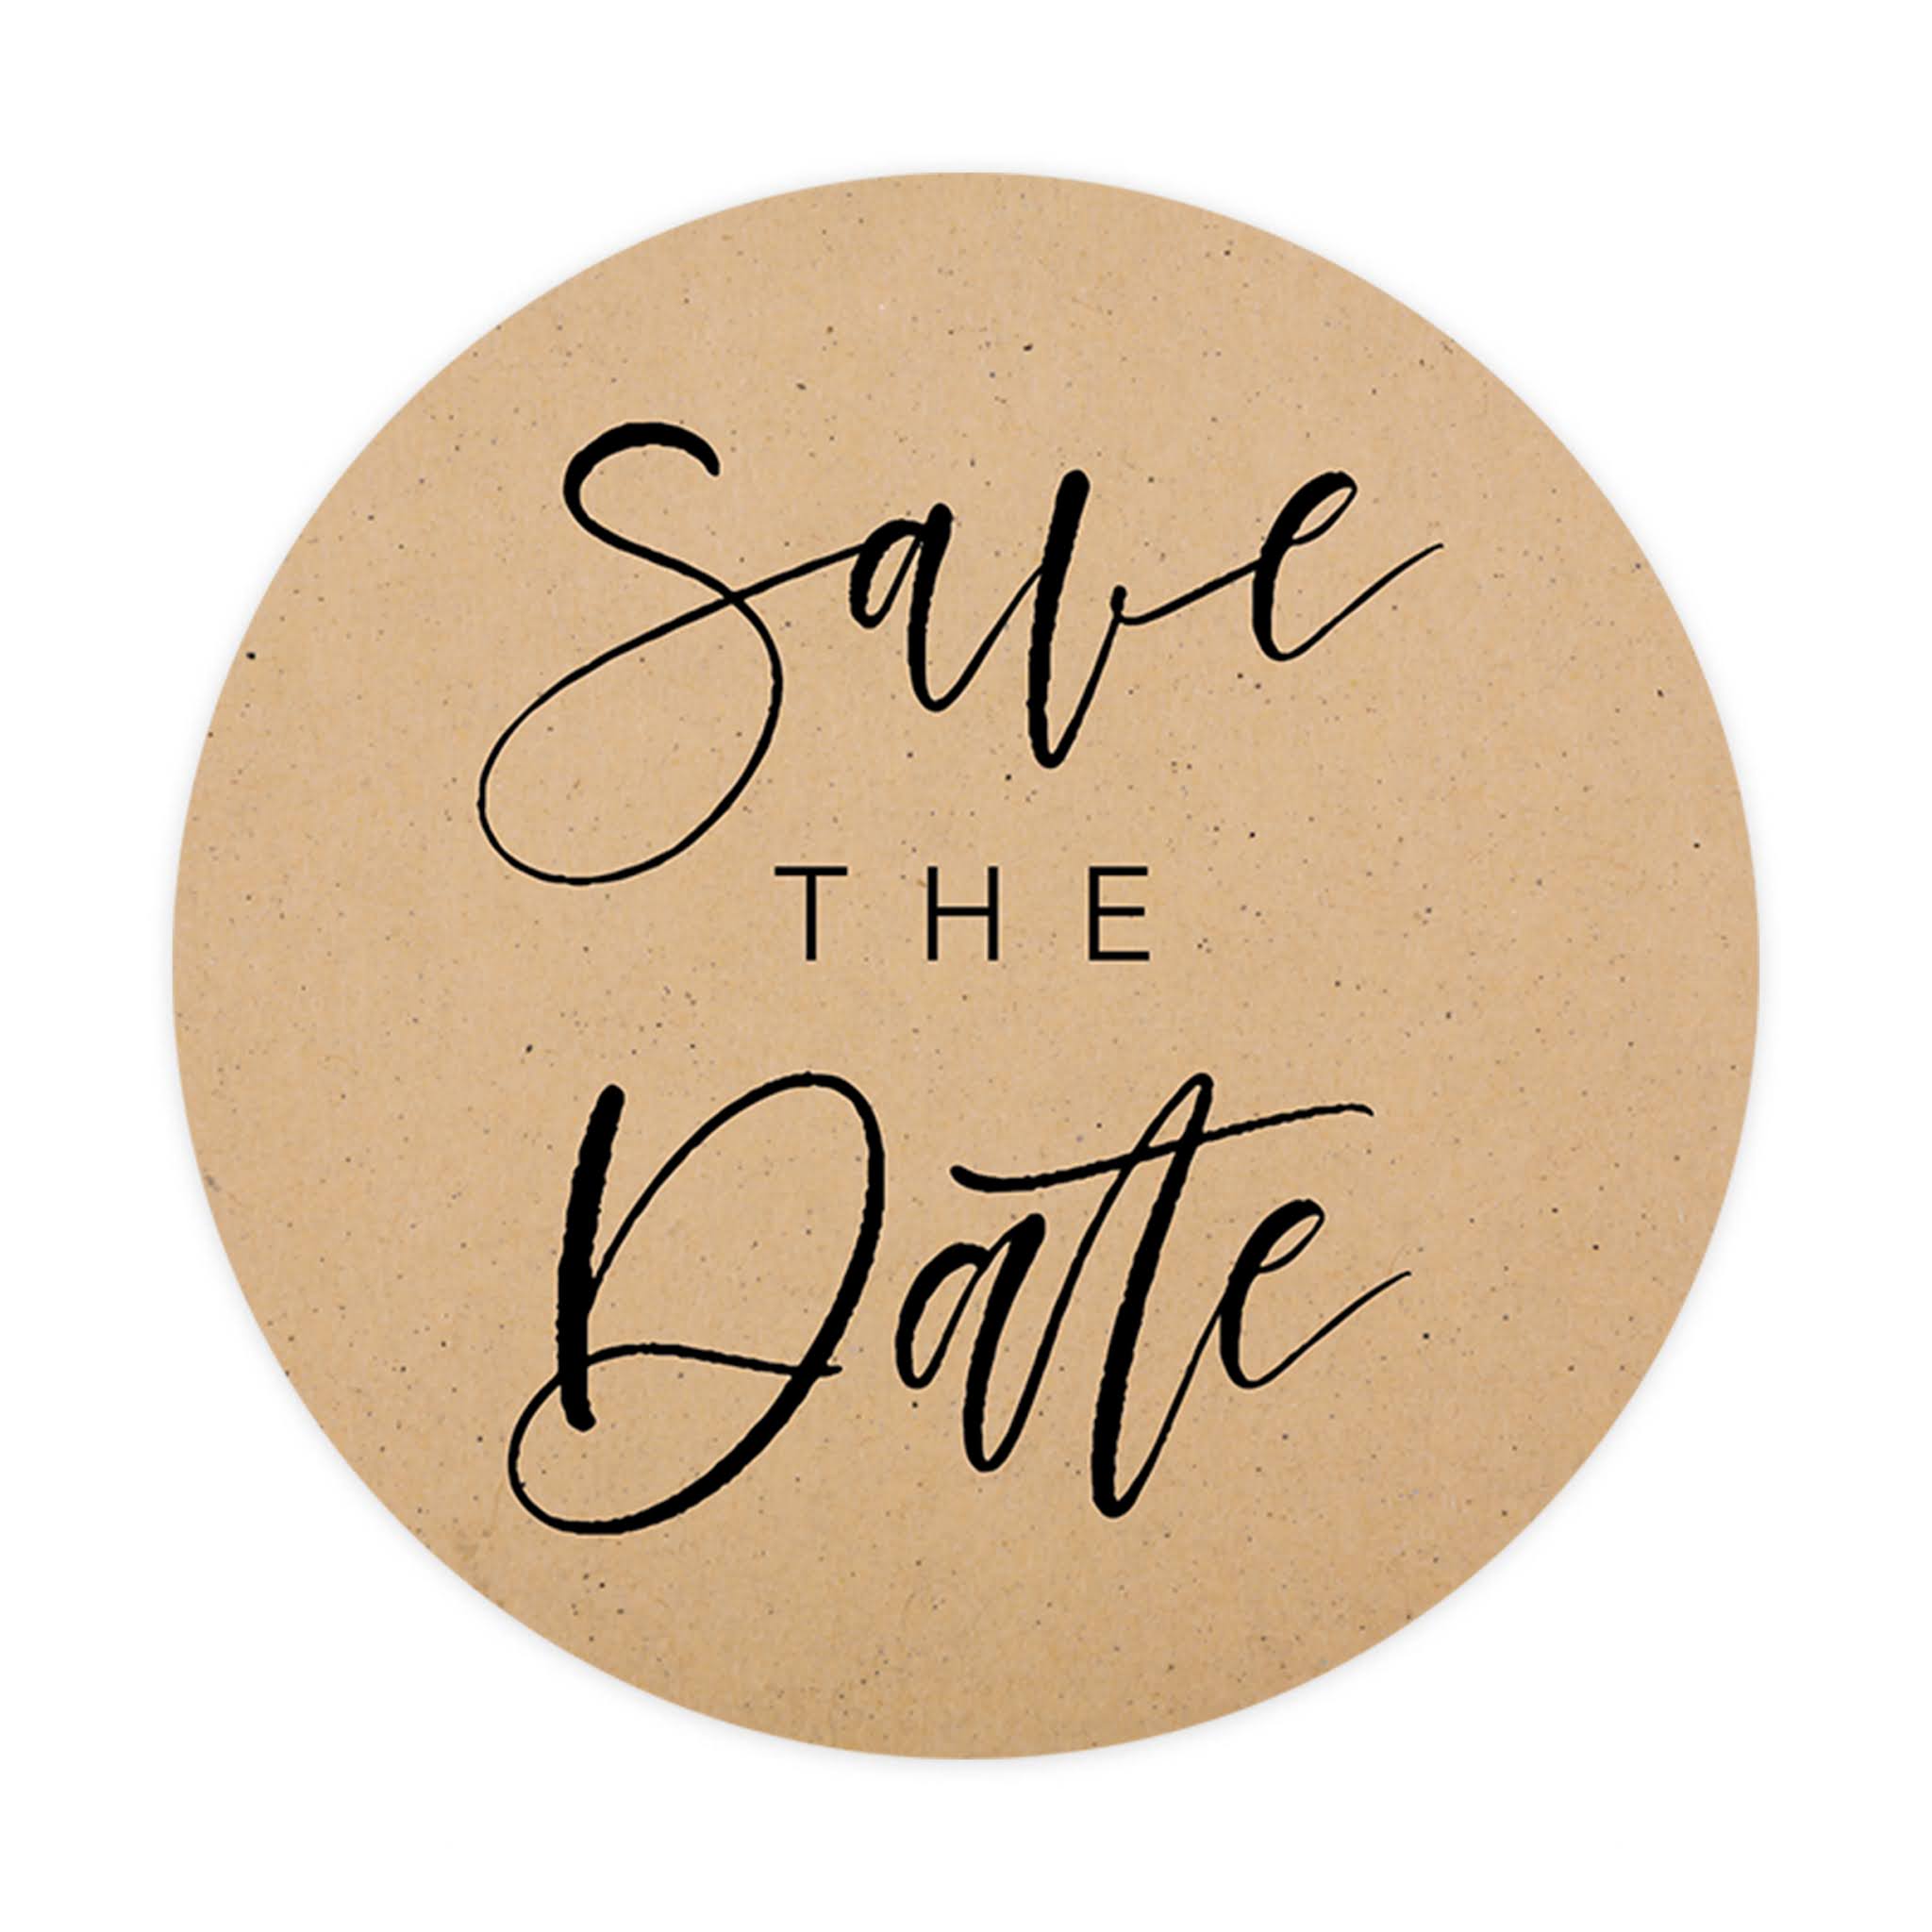  Andaz Press Save The Date Sticker Labels, Calligraphy Heart  Design, 2 inch Round Save The Date Seals for Wedding Invitations, Envelope  Seals, Envelope Sticker Labels for Wedding Stationery, 120-Pack : Office